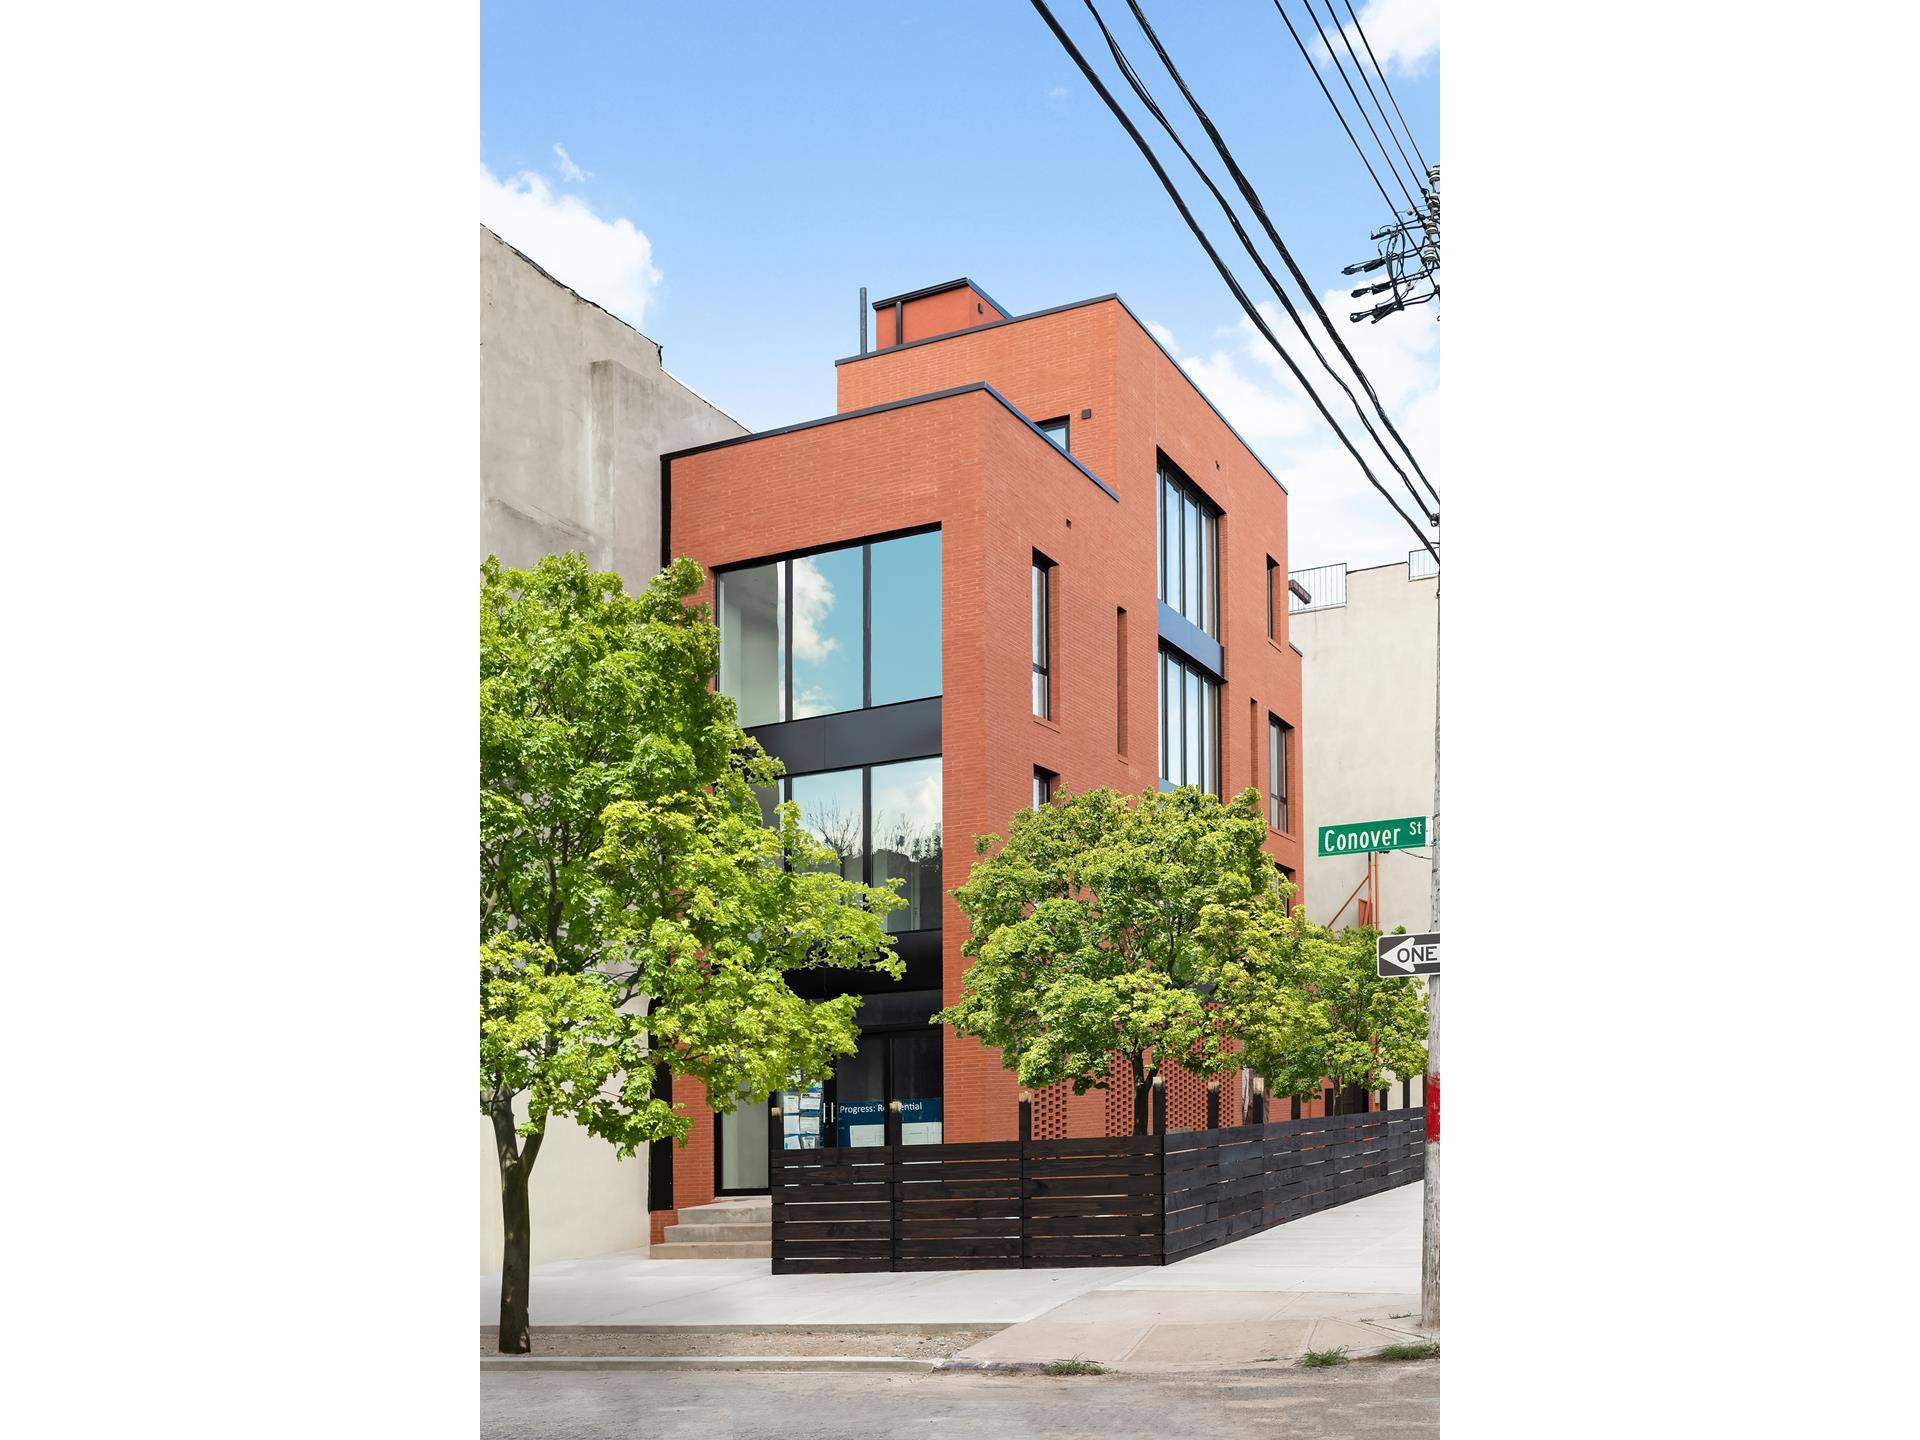 Welcome to 183 Conover Street, an impeccably designed Single Family new construction home on a quiet corner in Brooklyn.